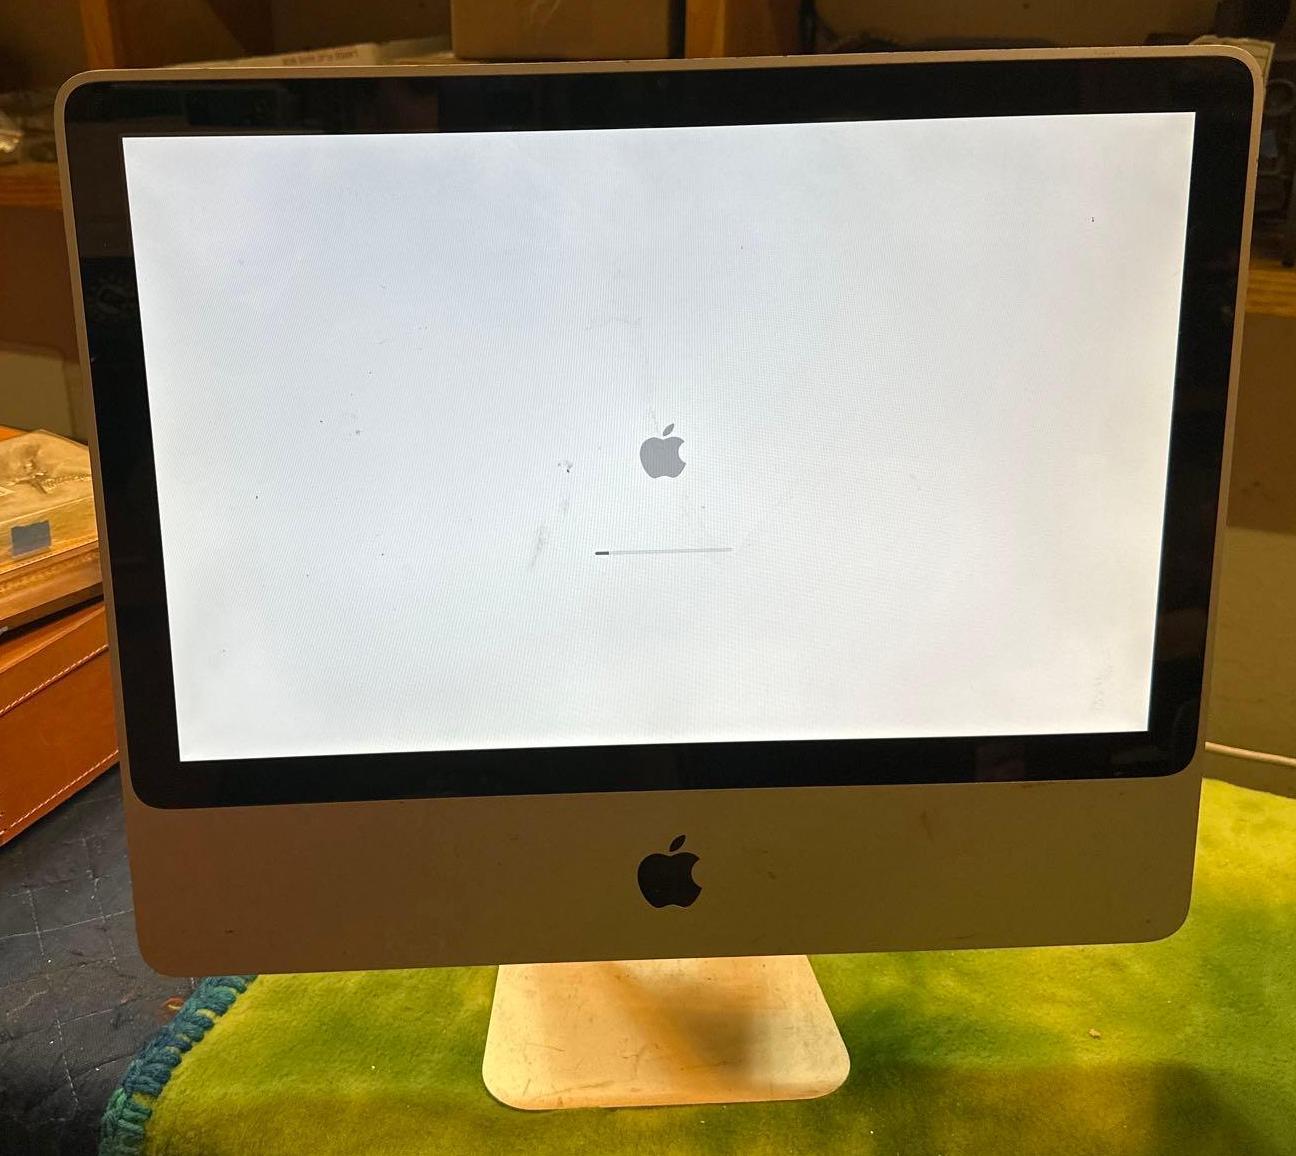 Apple iMac Computer - Works (Just Needs Keyboard and Mouse)